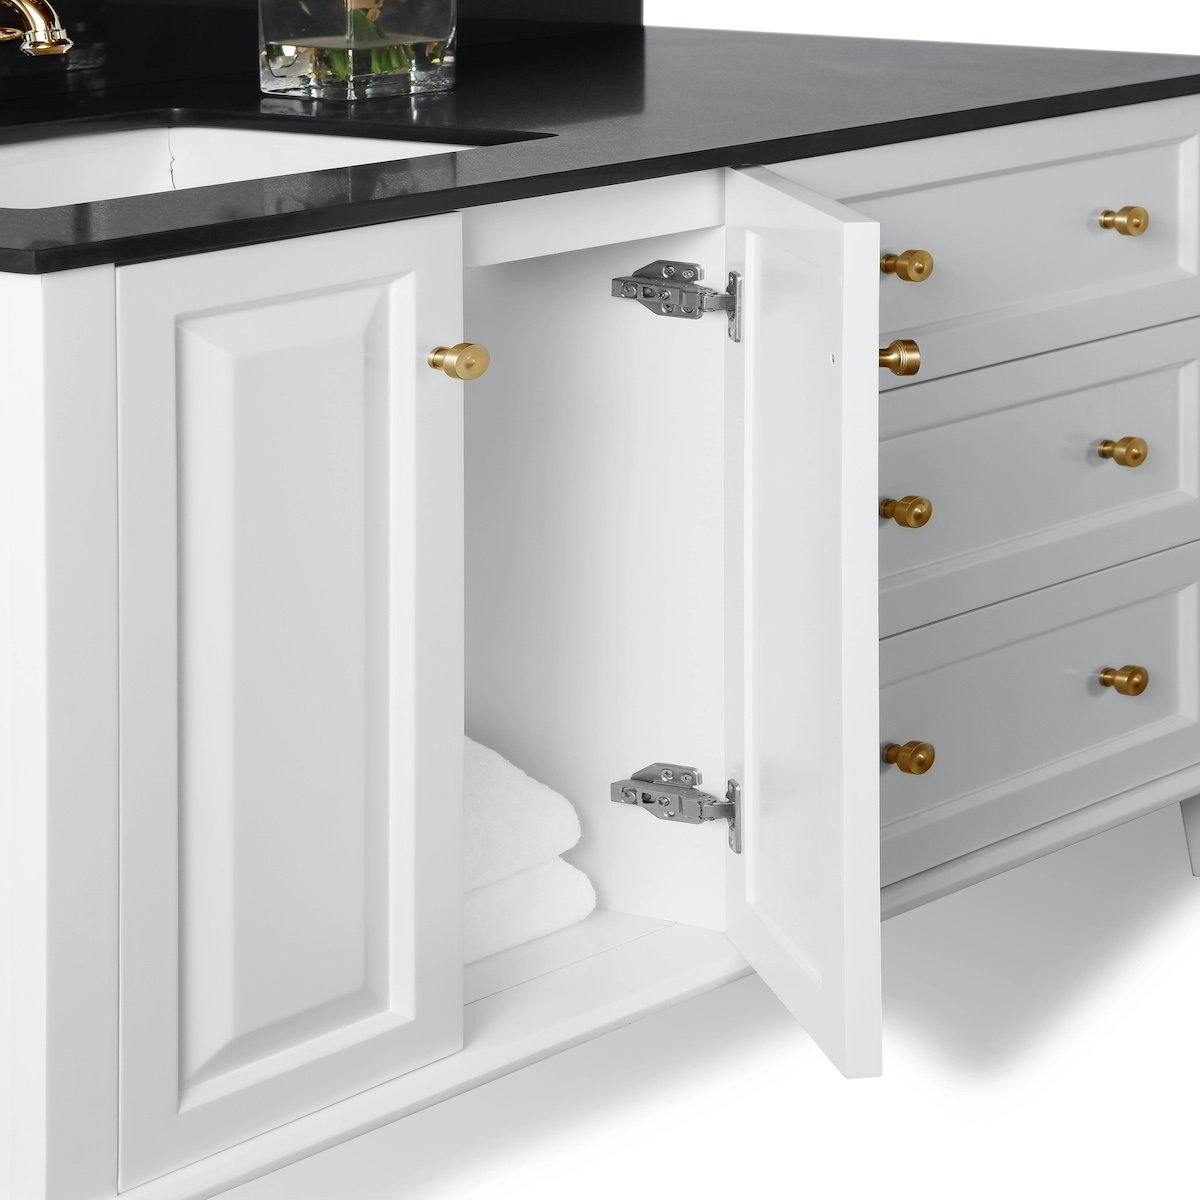 Ancerre Designs Hannah 48 Inch White Single Vanity with Left Basin and Gold Hardware Inside Cabinet